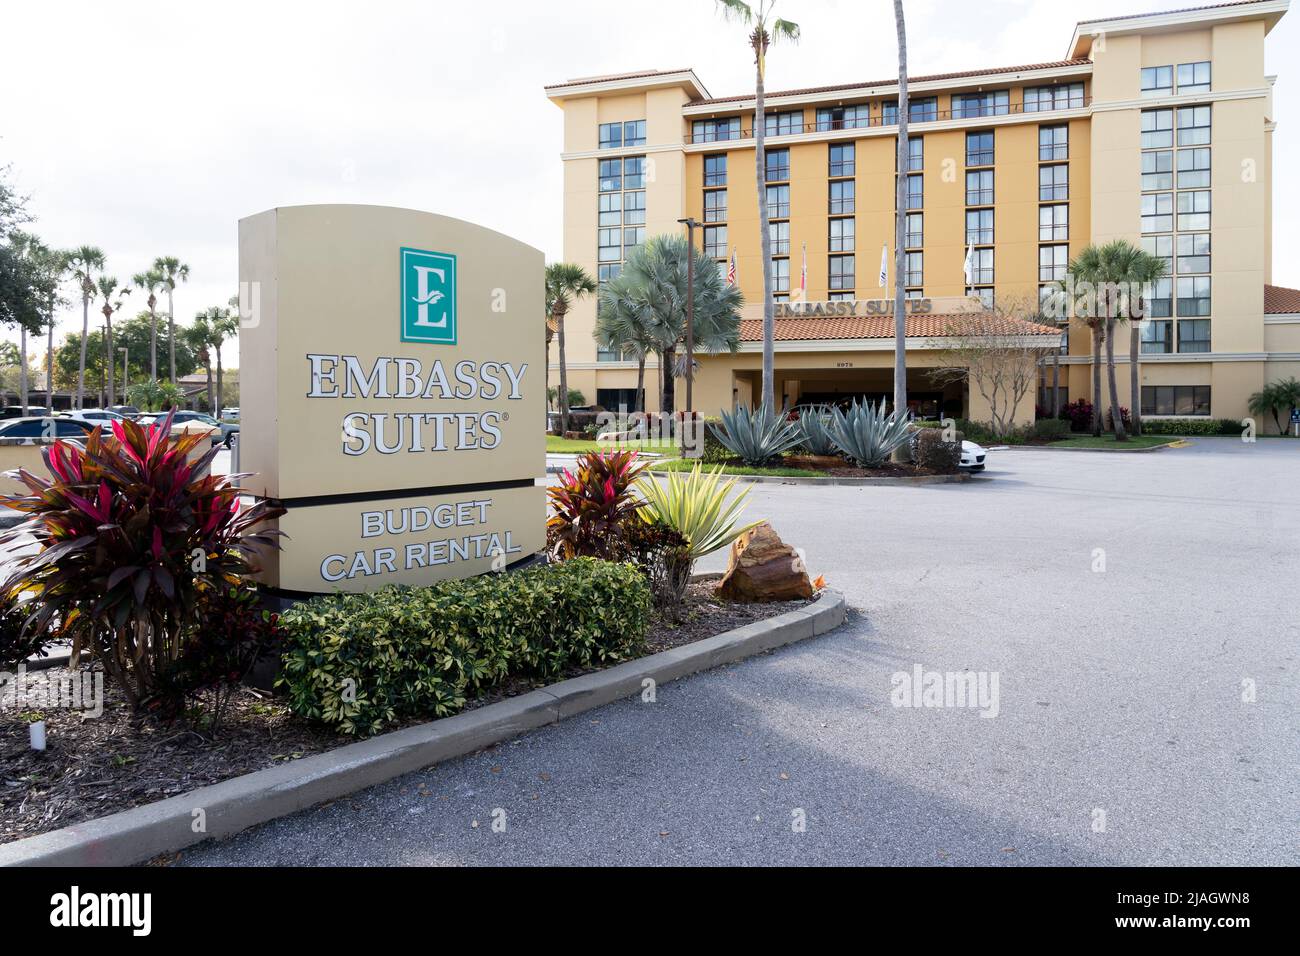 Orlando, FL, USA - January 5, 2022: Embassy Suites by Hilton is shown in Orlando, Florida, USA. Stock Photo